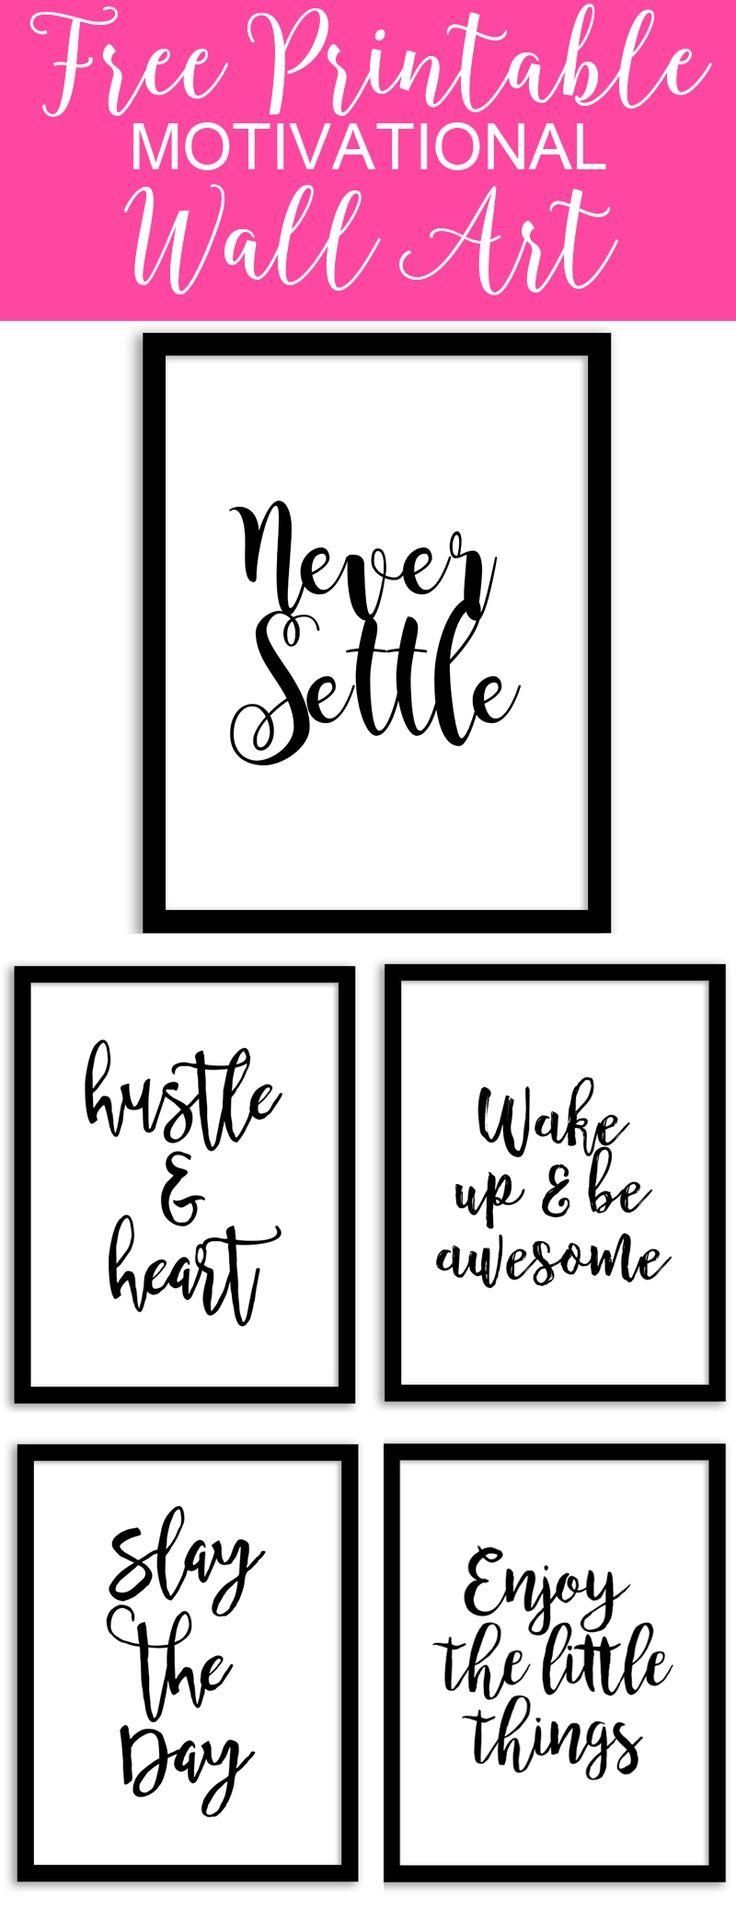 Best 25+ Office Wall Art Ideas On Pinterest | Office Wall Design Pertaining To Inspirational Wall Art For Office (View 13 of 20)